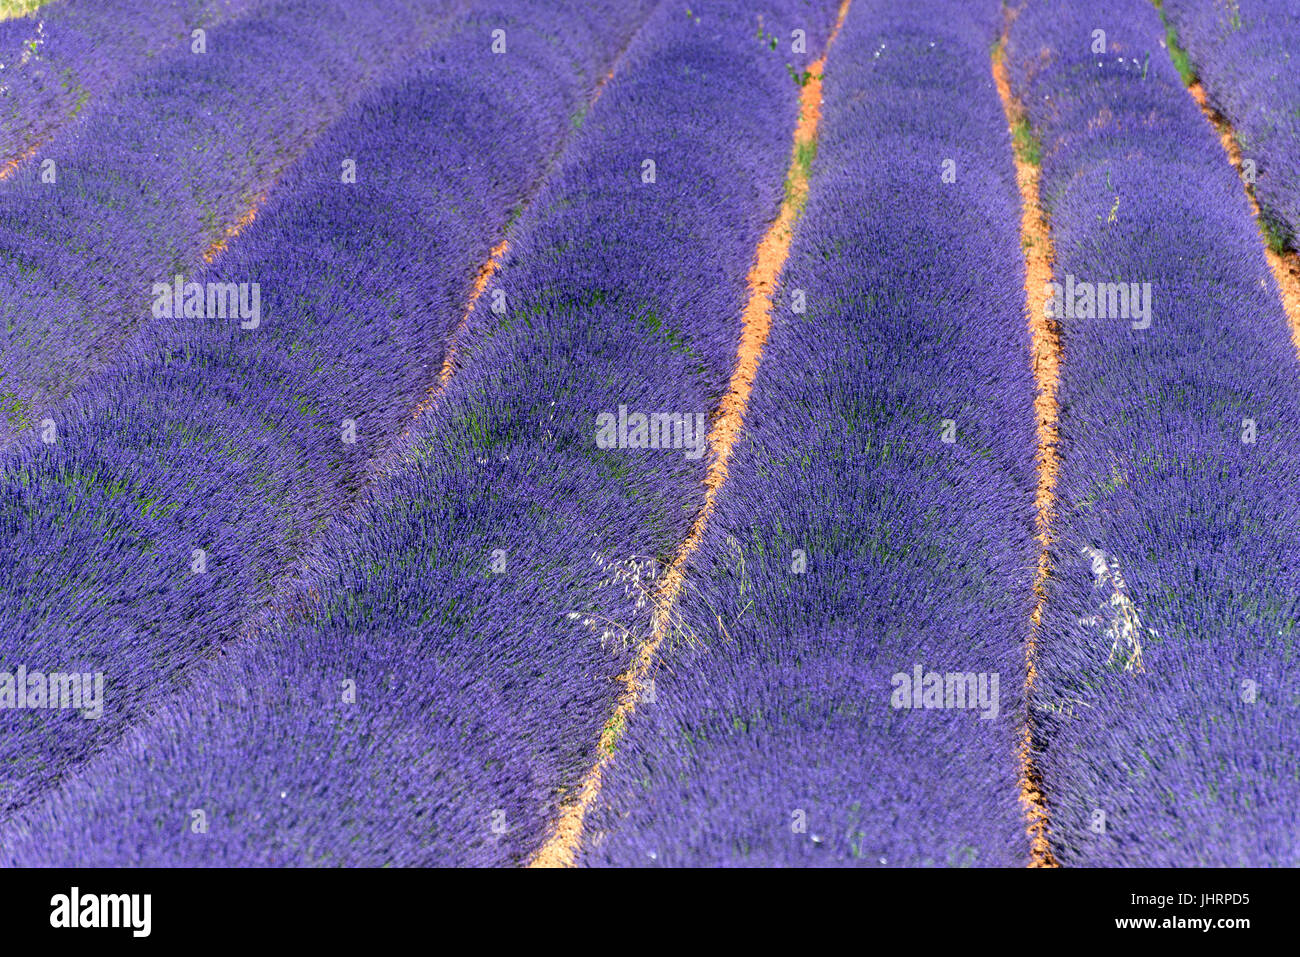 Lavender fields-traffic sign Roussillon, Provence France Stock Photo